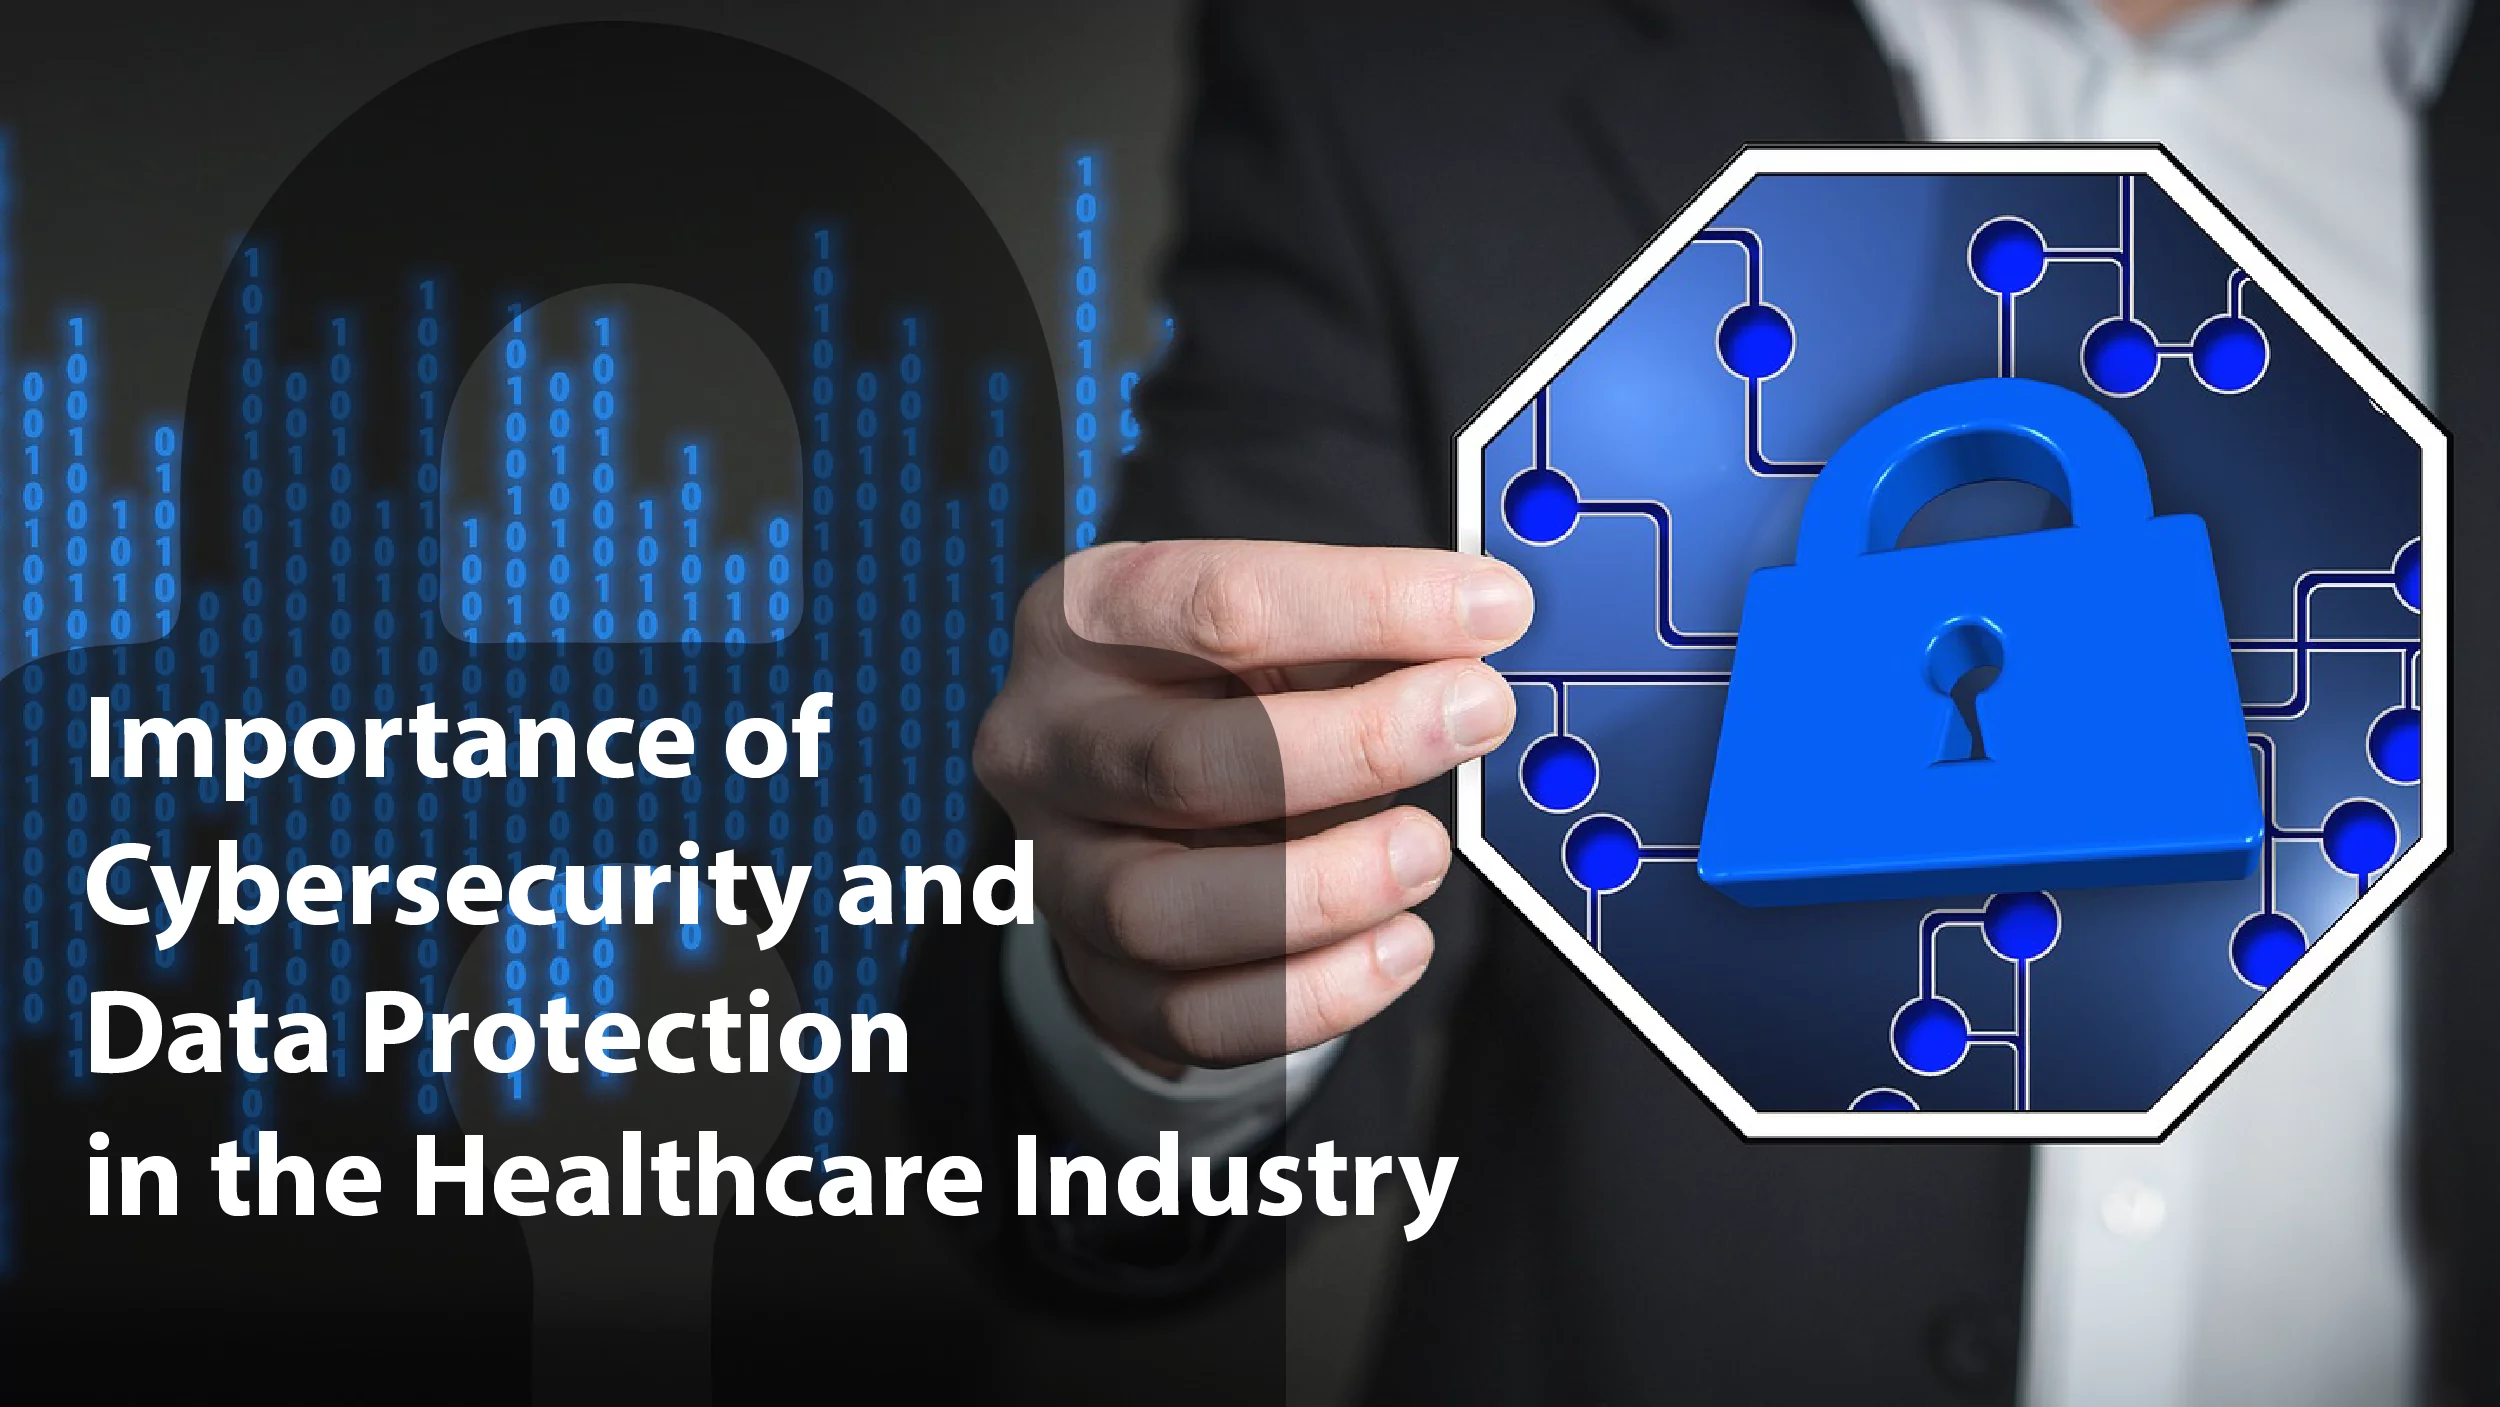 Importance of Cybersecurity and Data Protection in the Healthcare Industry